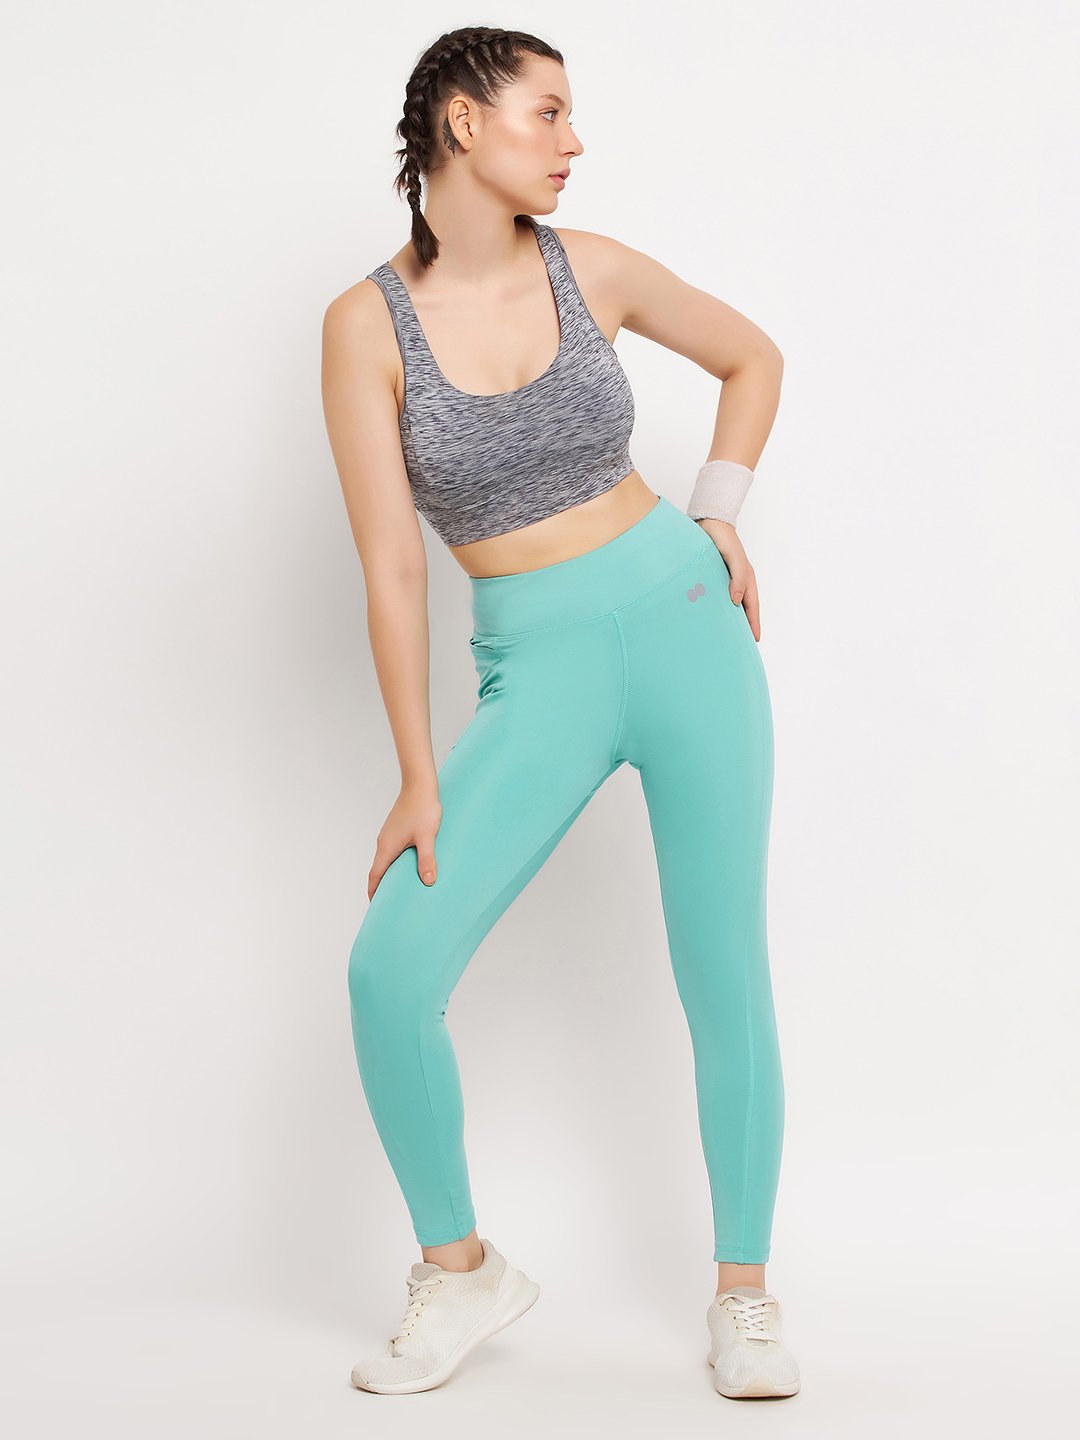 High Rise Printed Active Tights in Mint Green with Side Pocket